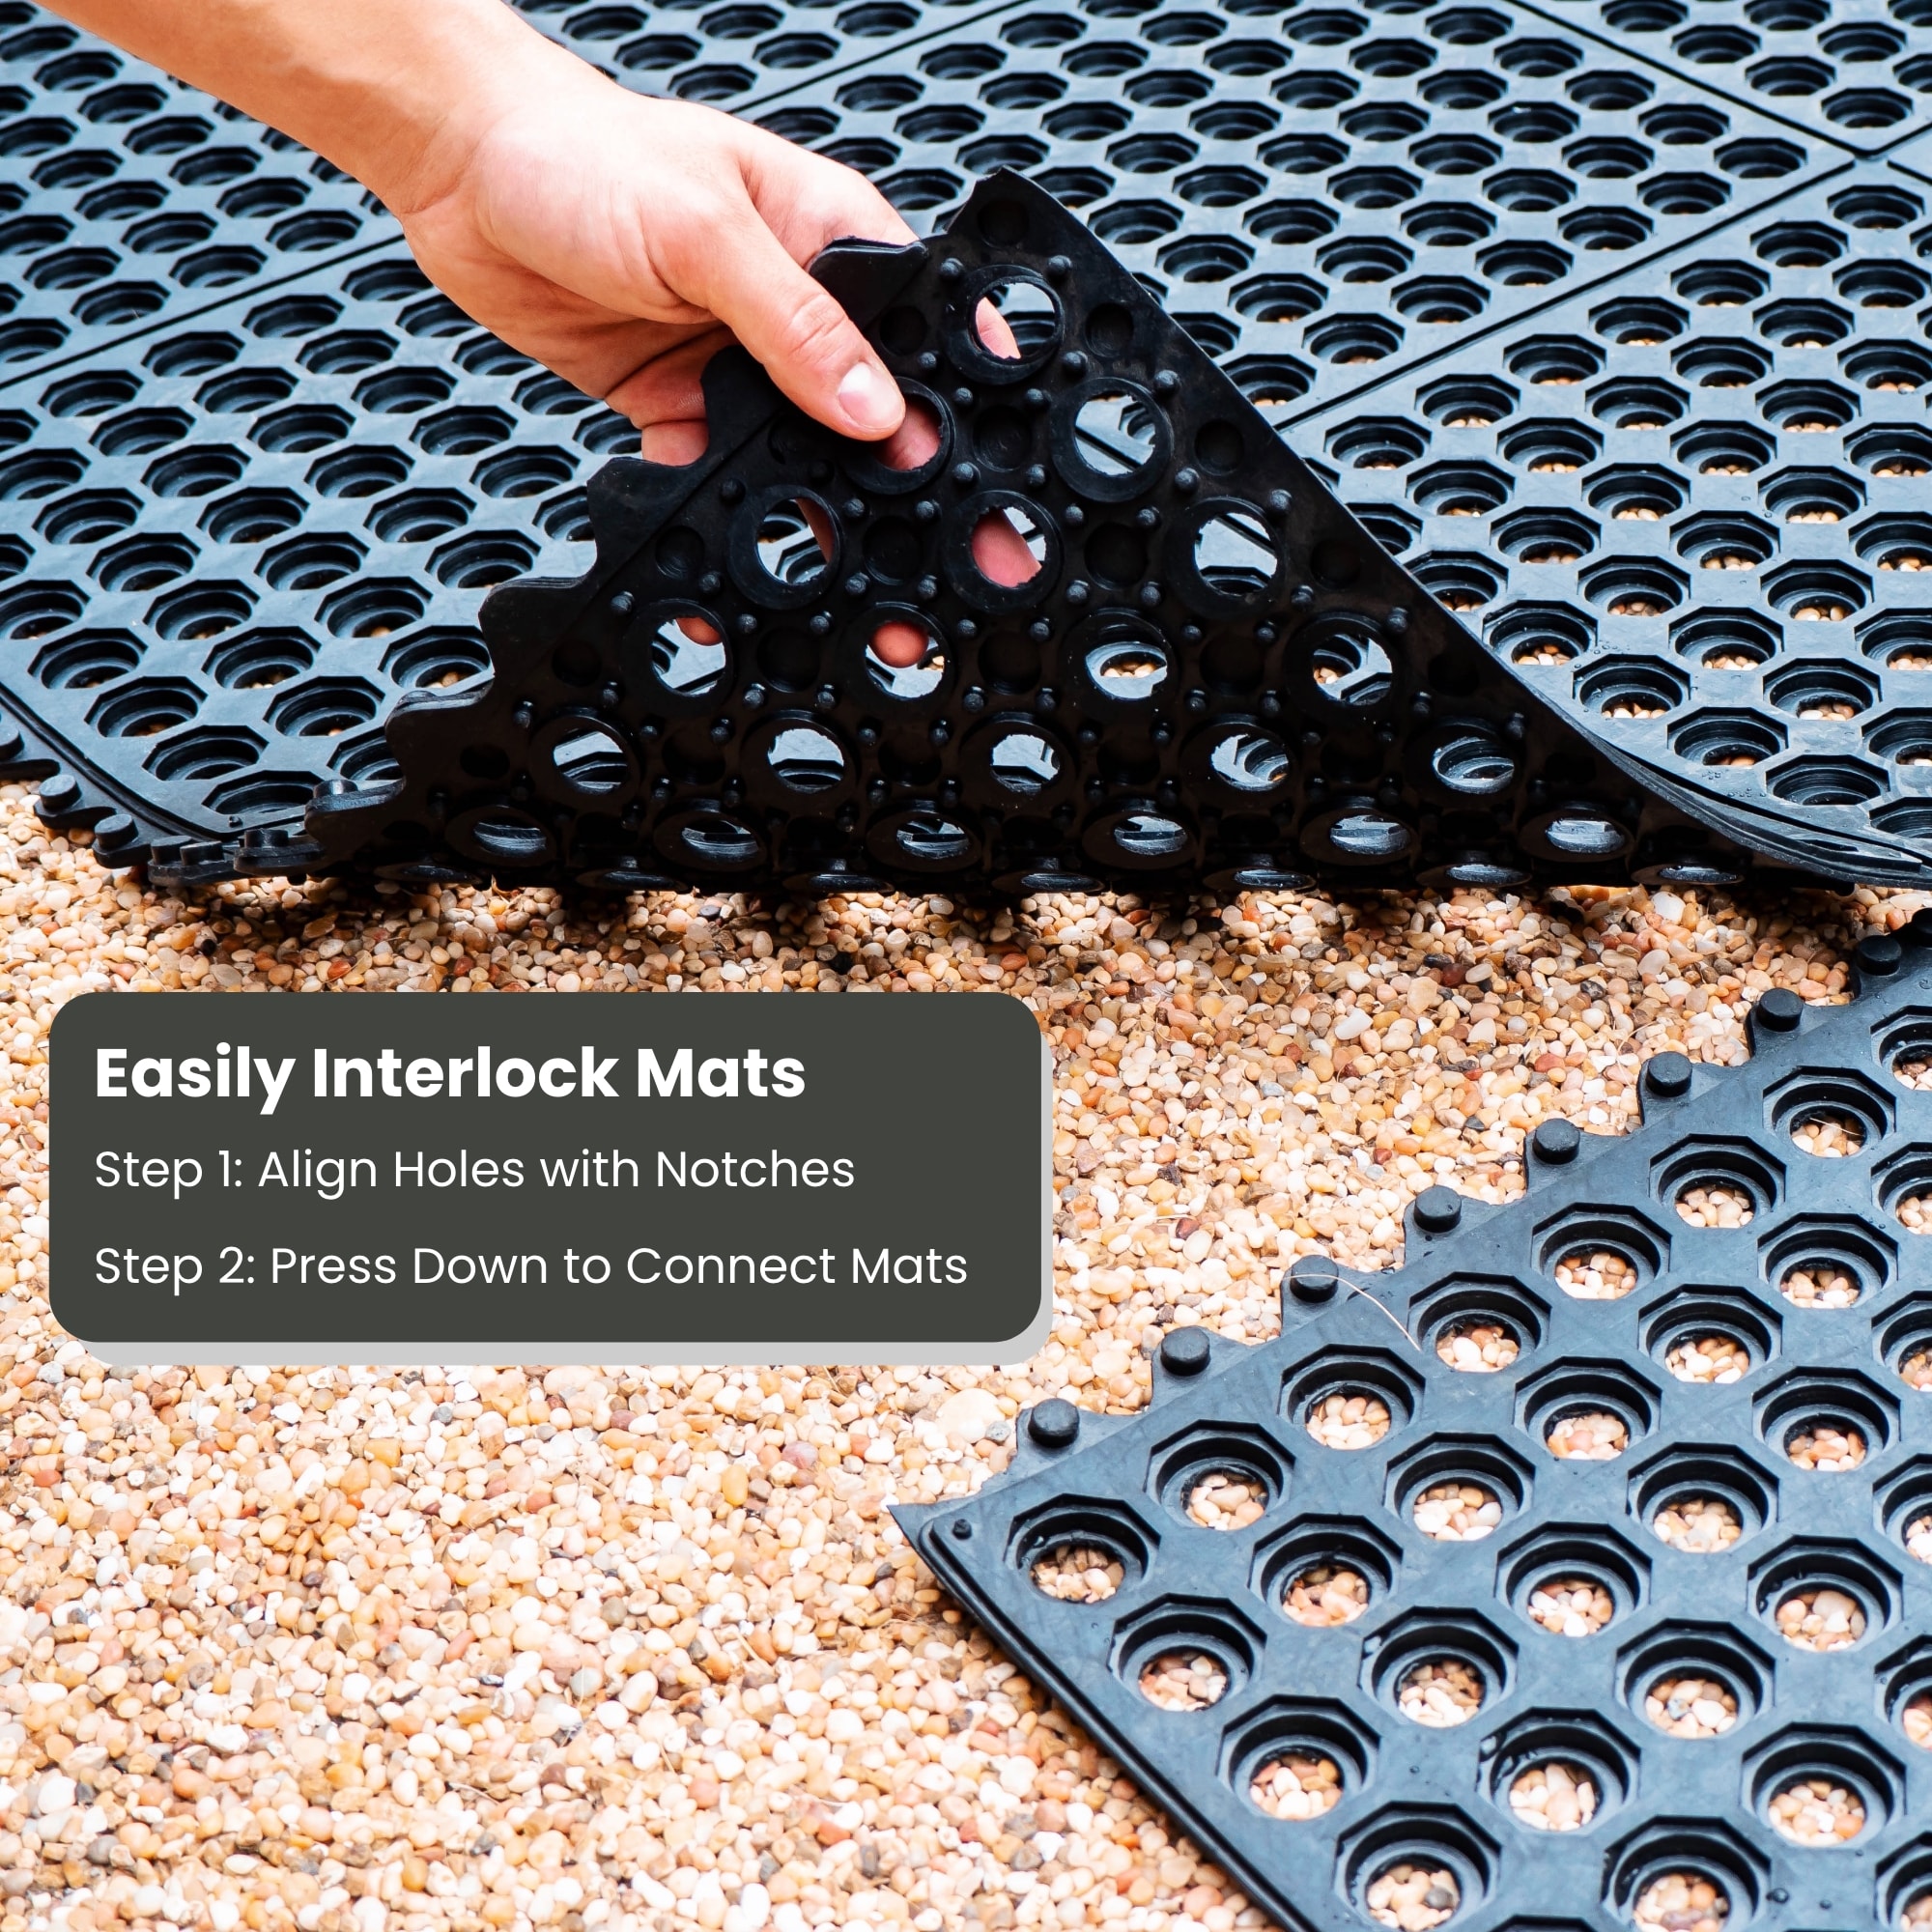 Stop-N-Dry  Industrial Rubber Anti-Fatigue Mats, Dock Bumpers